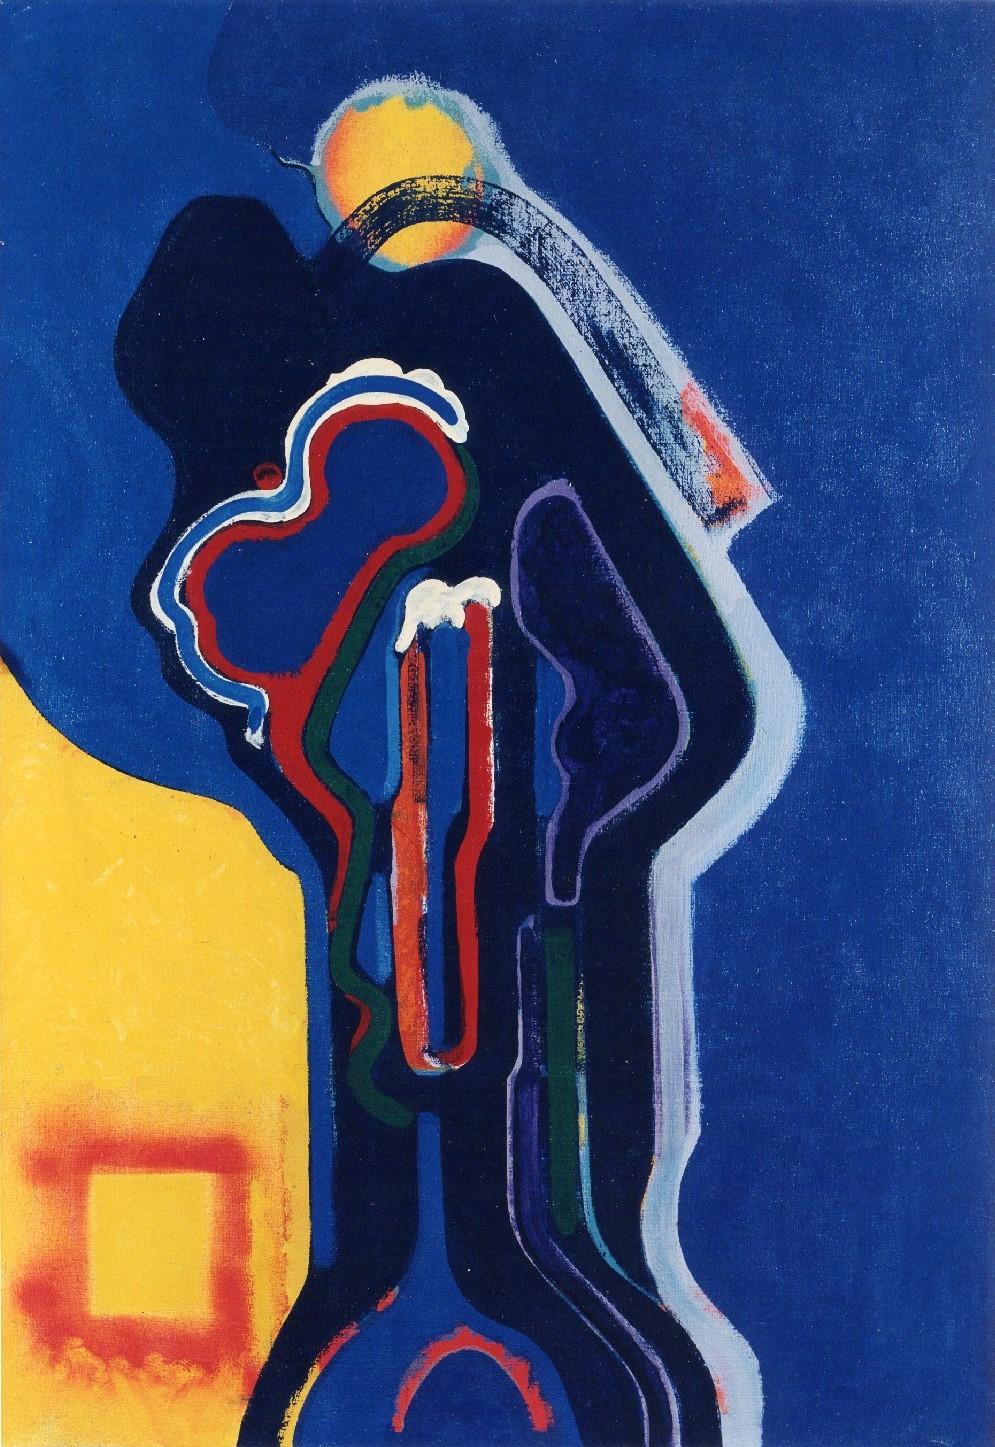 Claude Bellegarde (1927) Abstract Composition, 1971, oil on canvas; signed and dated on the verse.

SIZE: cm. 130 x 89 x 2
SIZE WITH FRAME: cm. 132 x 91 x 3

Provenance: 
Bergamo, Italy, private collection.

Exhibition: 
"Keith Haring e pittura